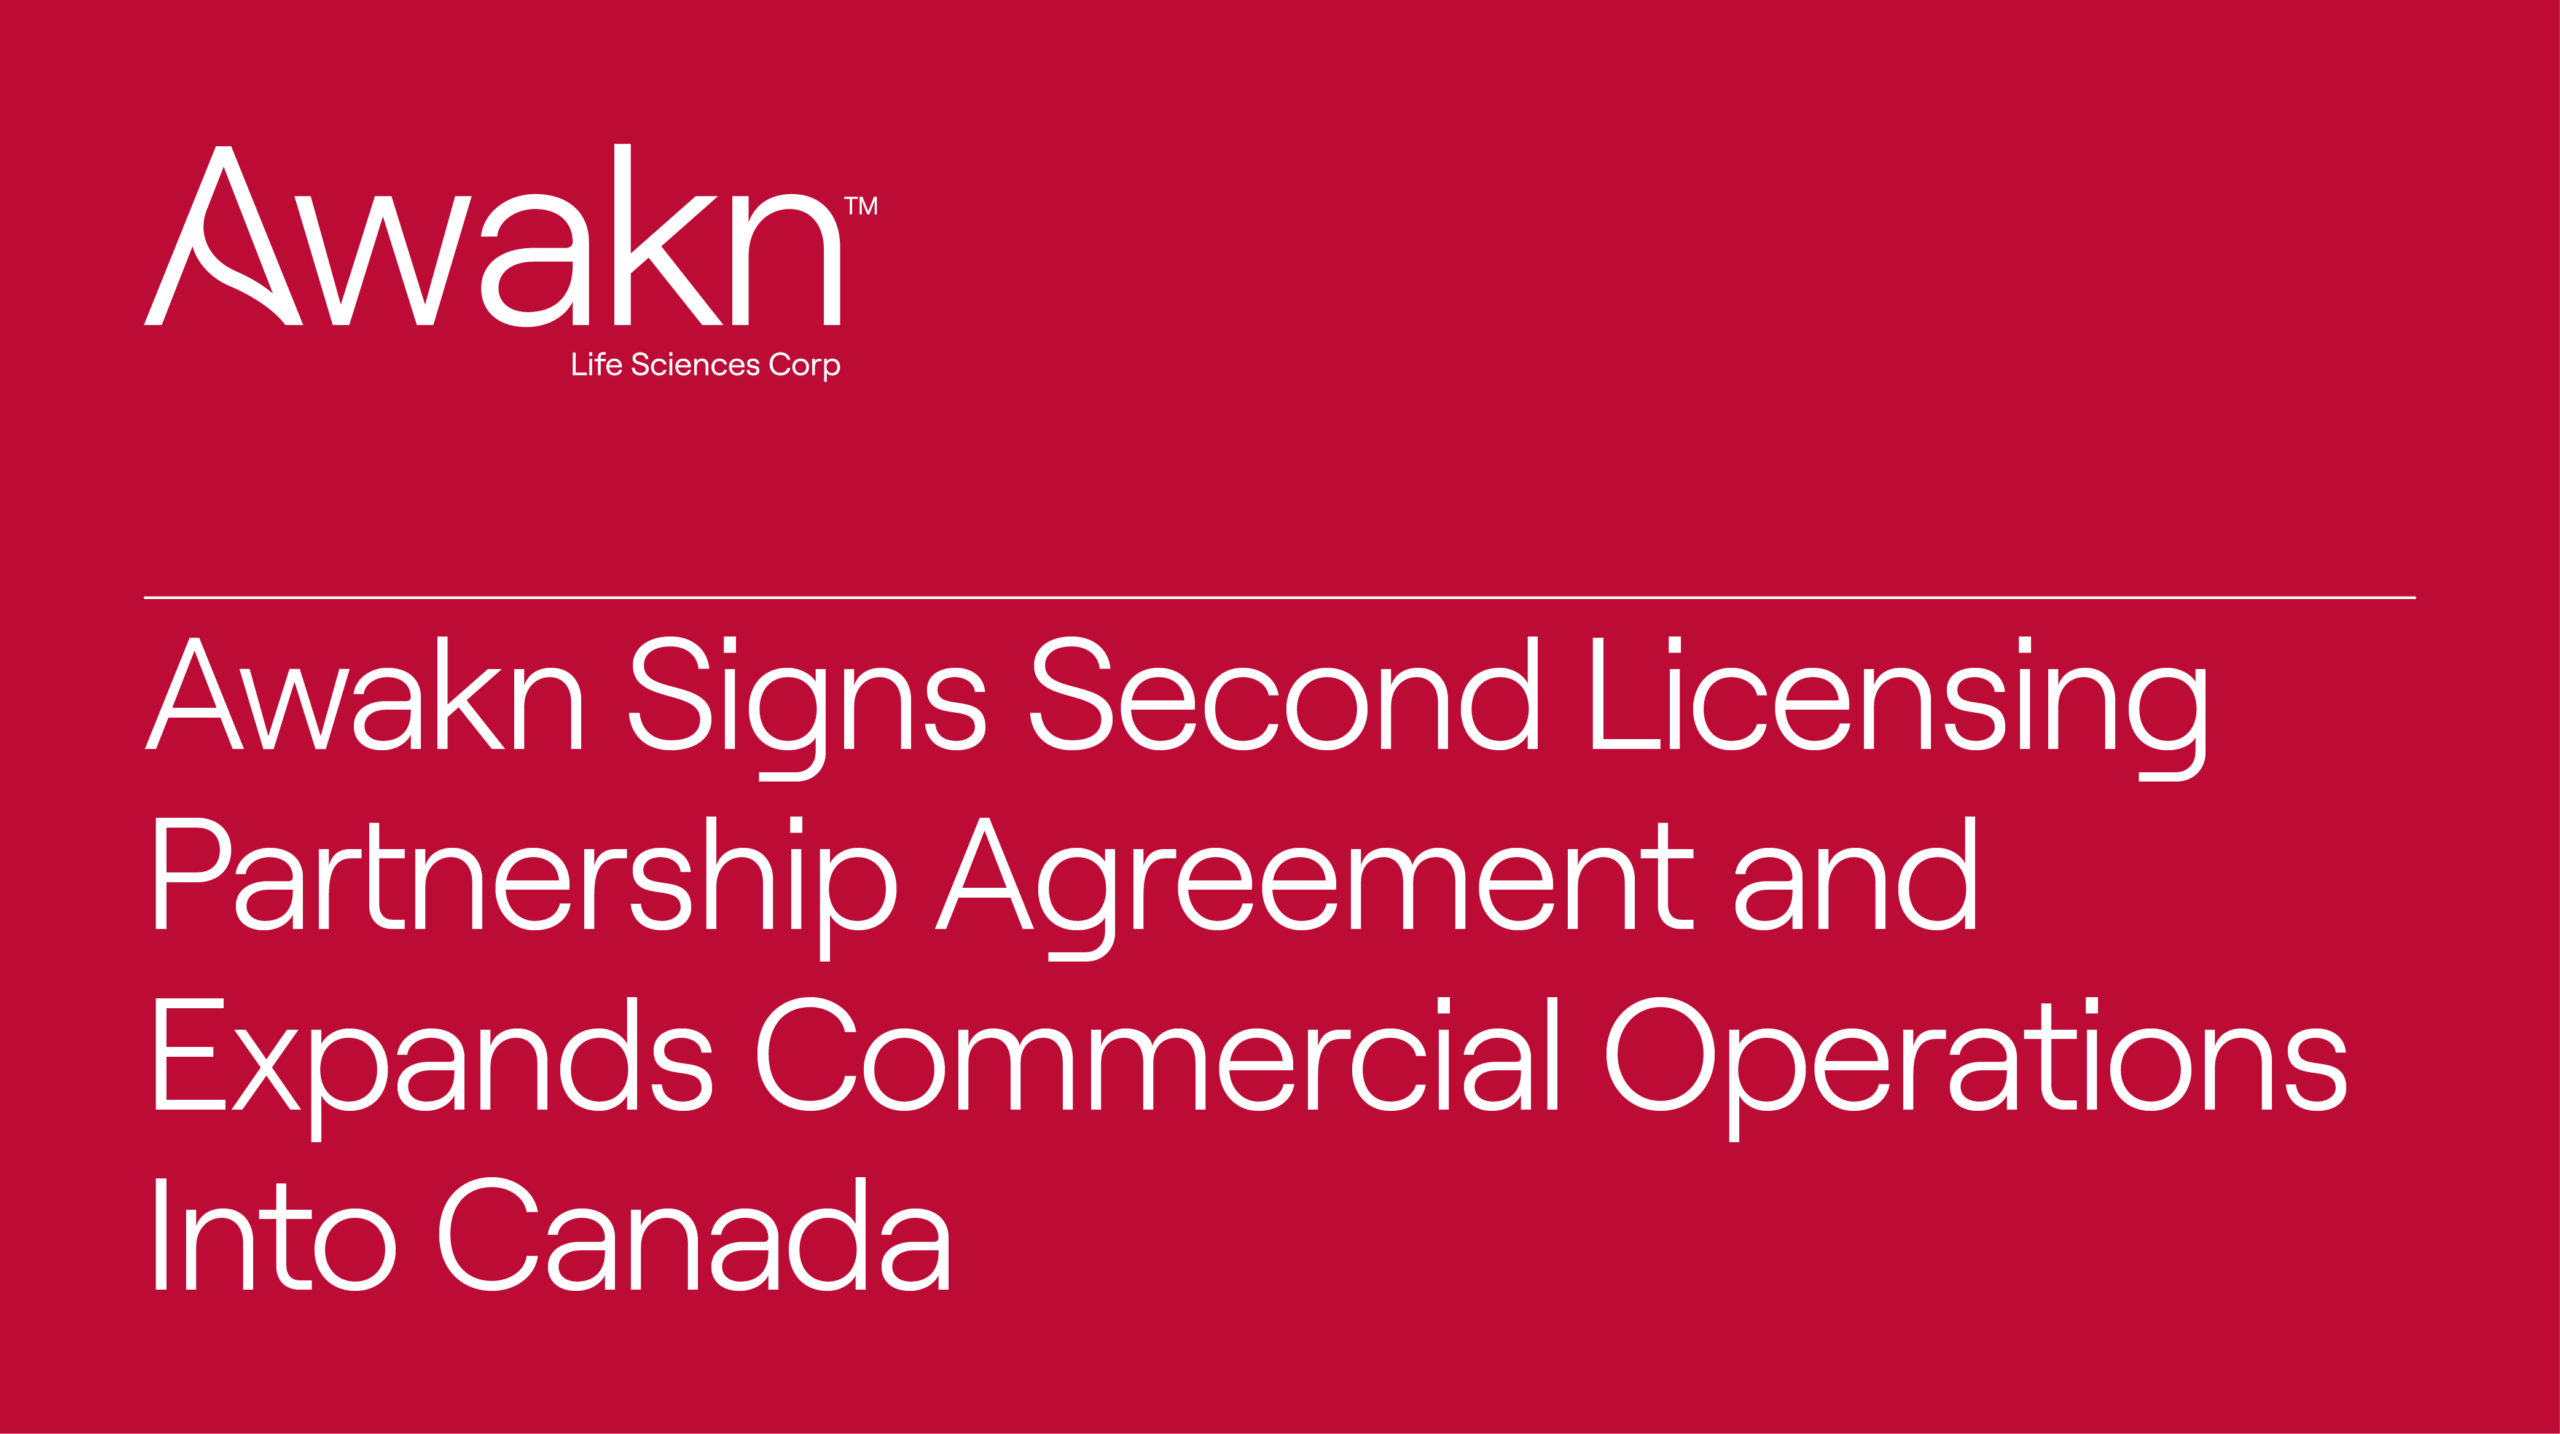 Awakn Life Sciences Signs Second Licensing Partnership Agreement And Expands Commercial Operations Into Canada